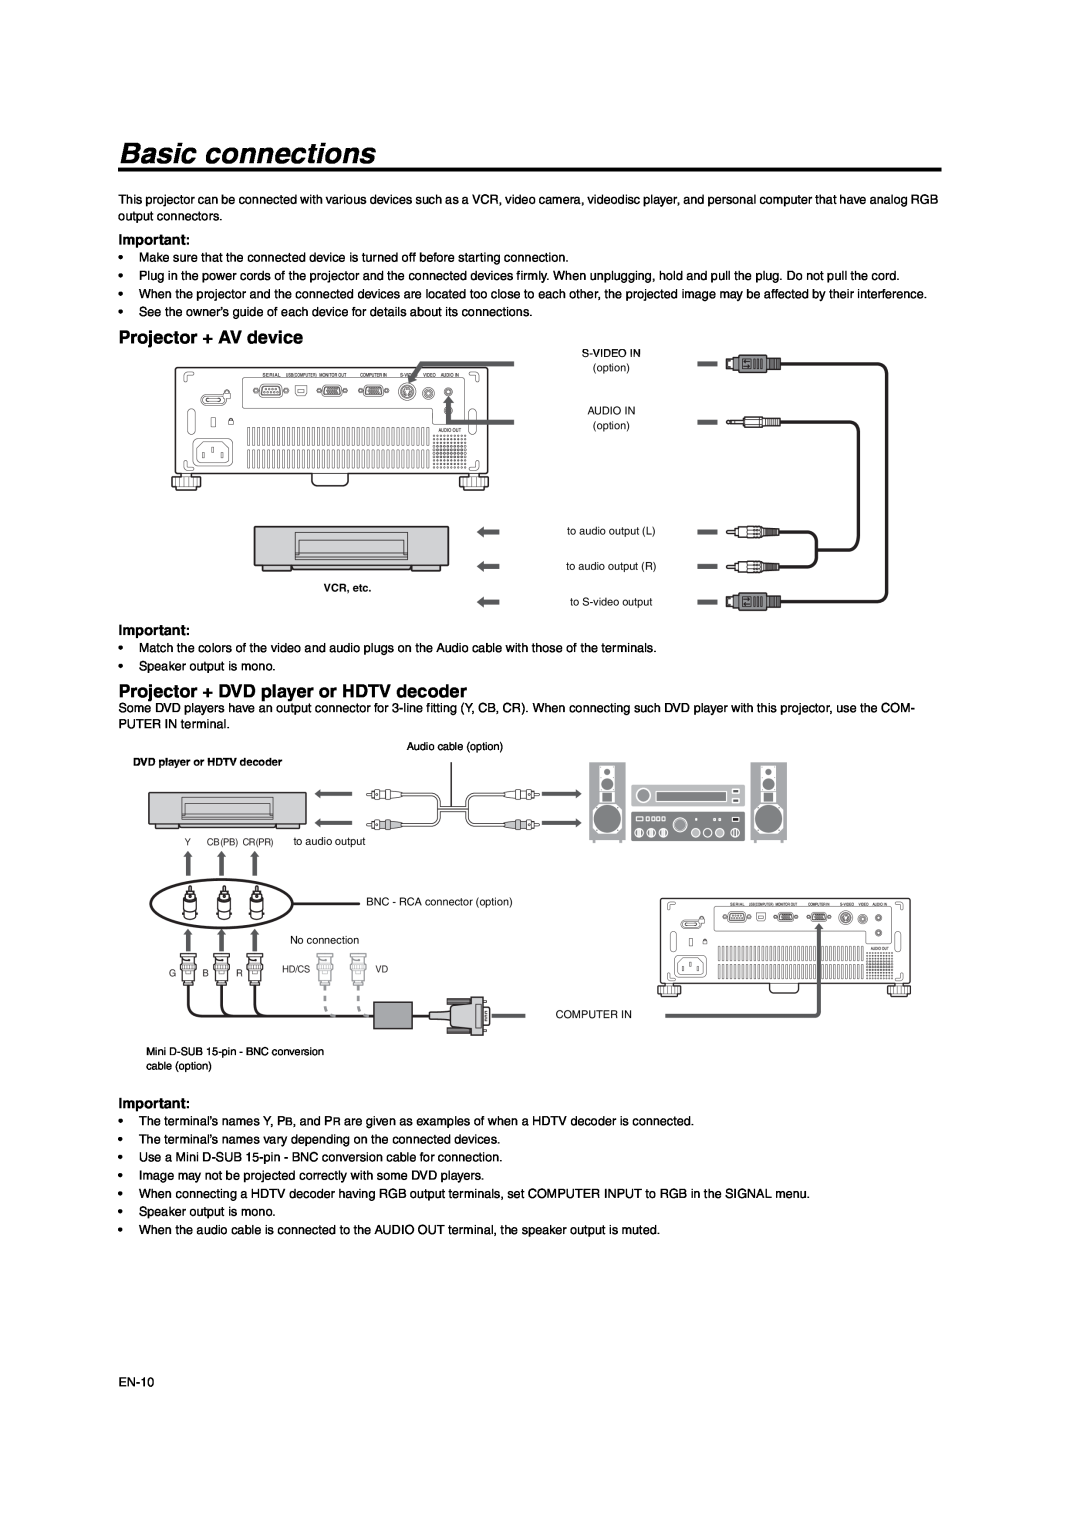 Mitsumi electronic XD206U user manual Basic connections, Projector + AV device, Projector + DVD player or HDTV decoder 